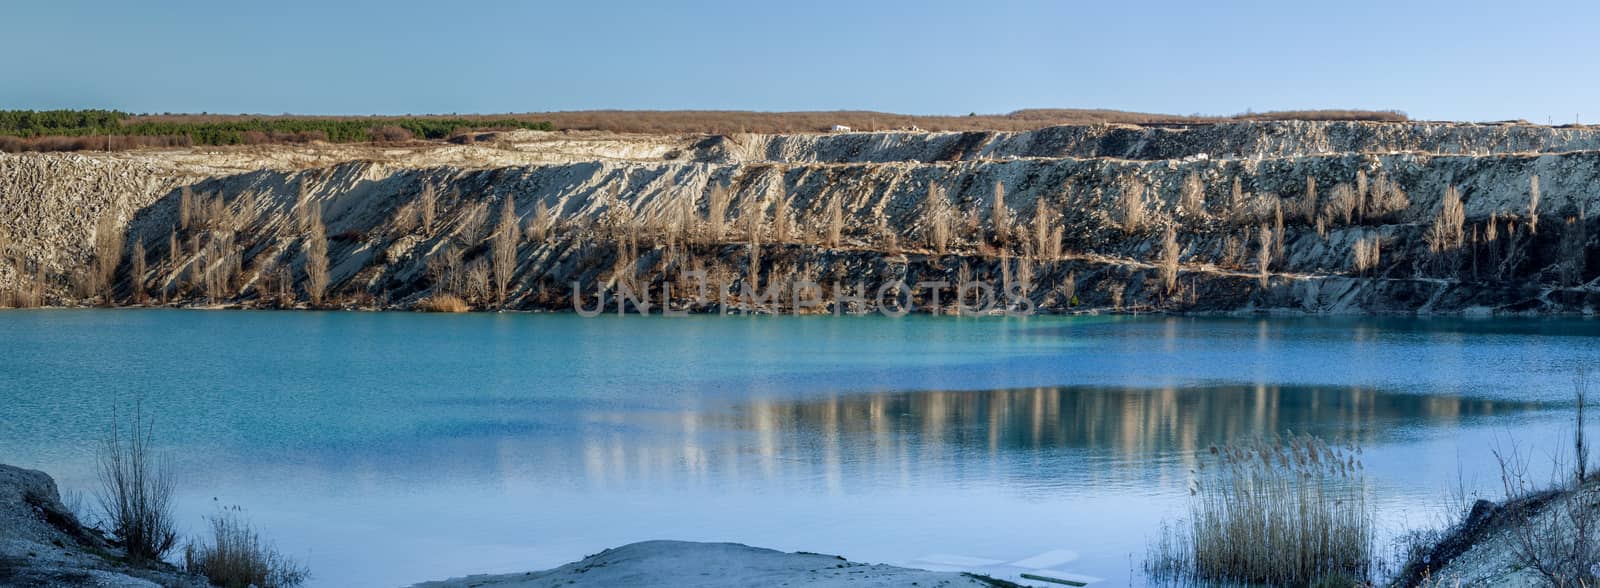 Lake emerald-turquoise color formed in an old quarry